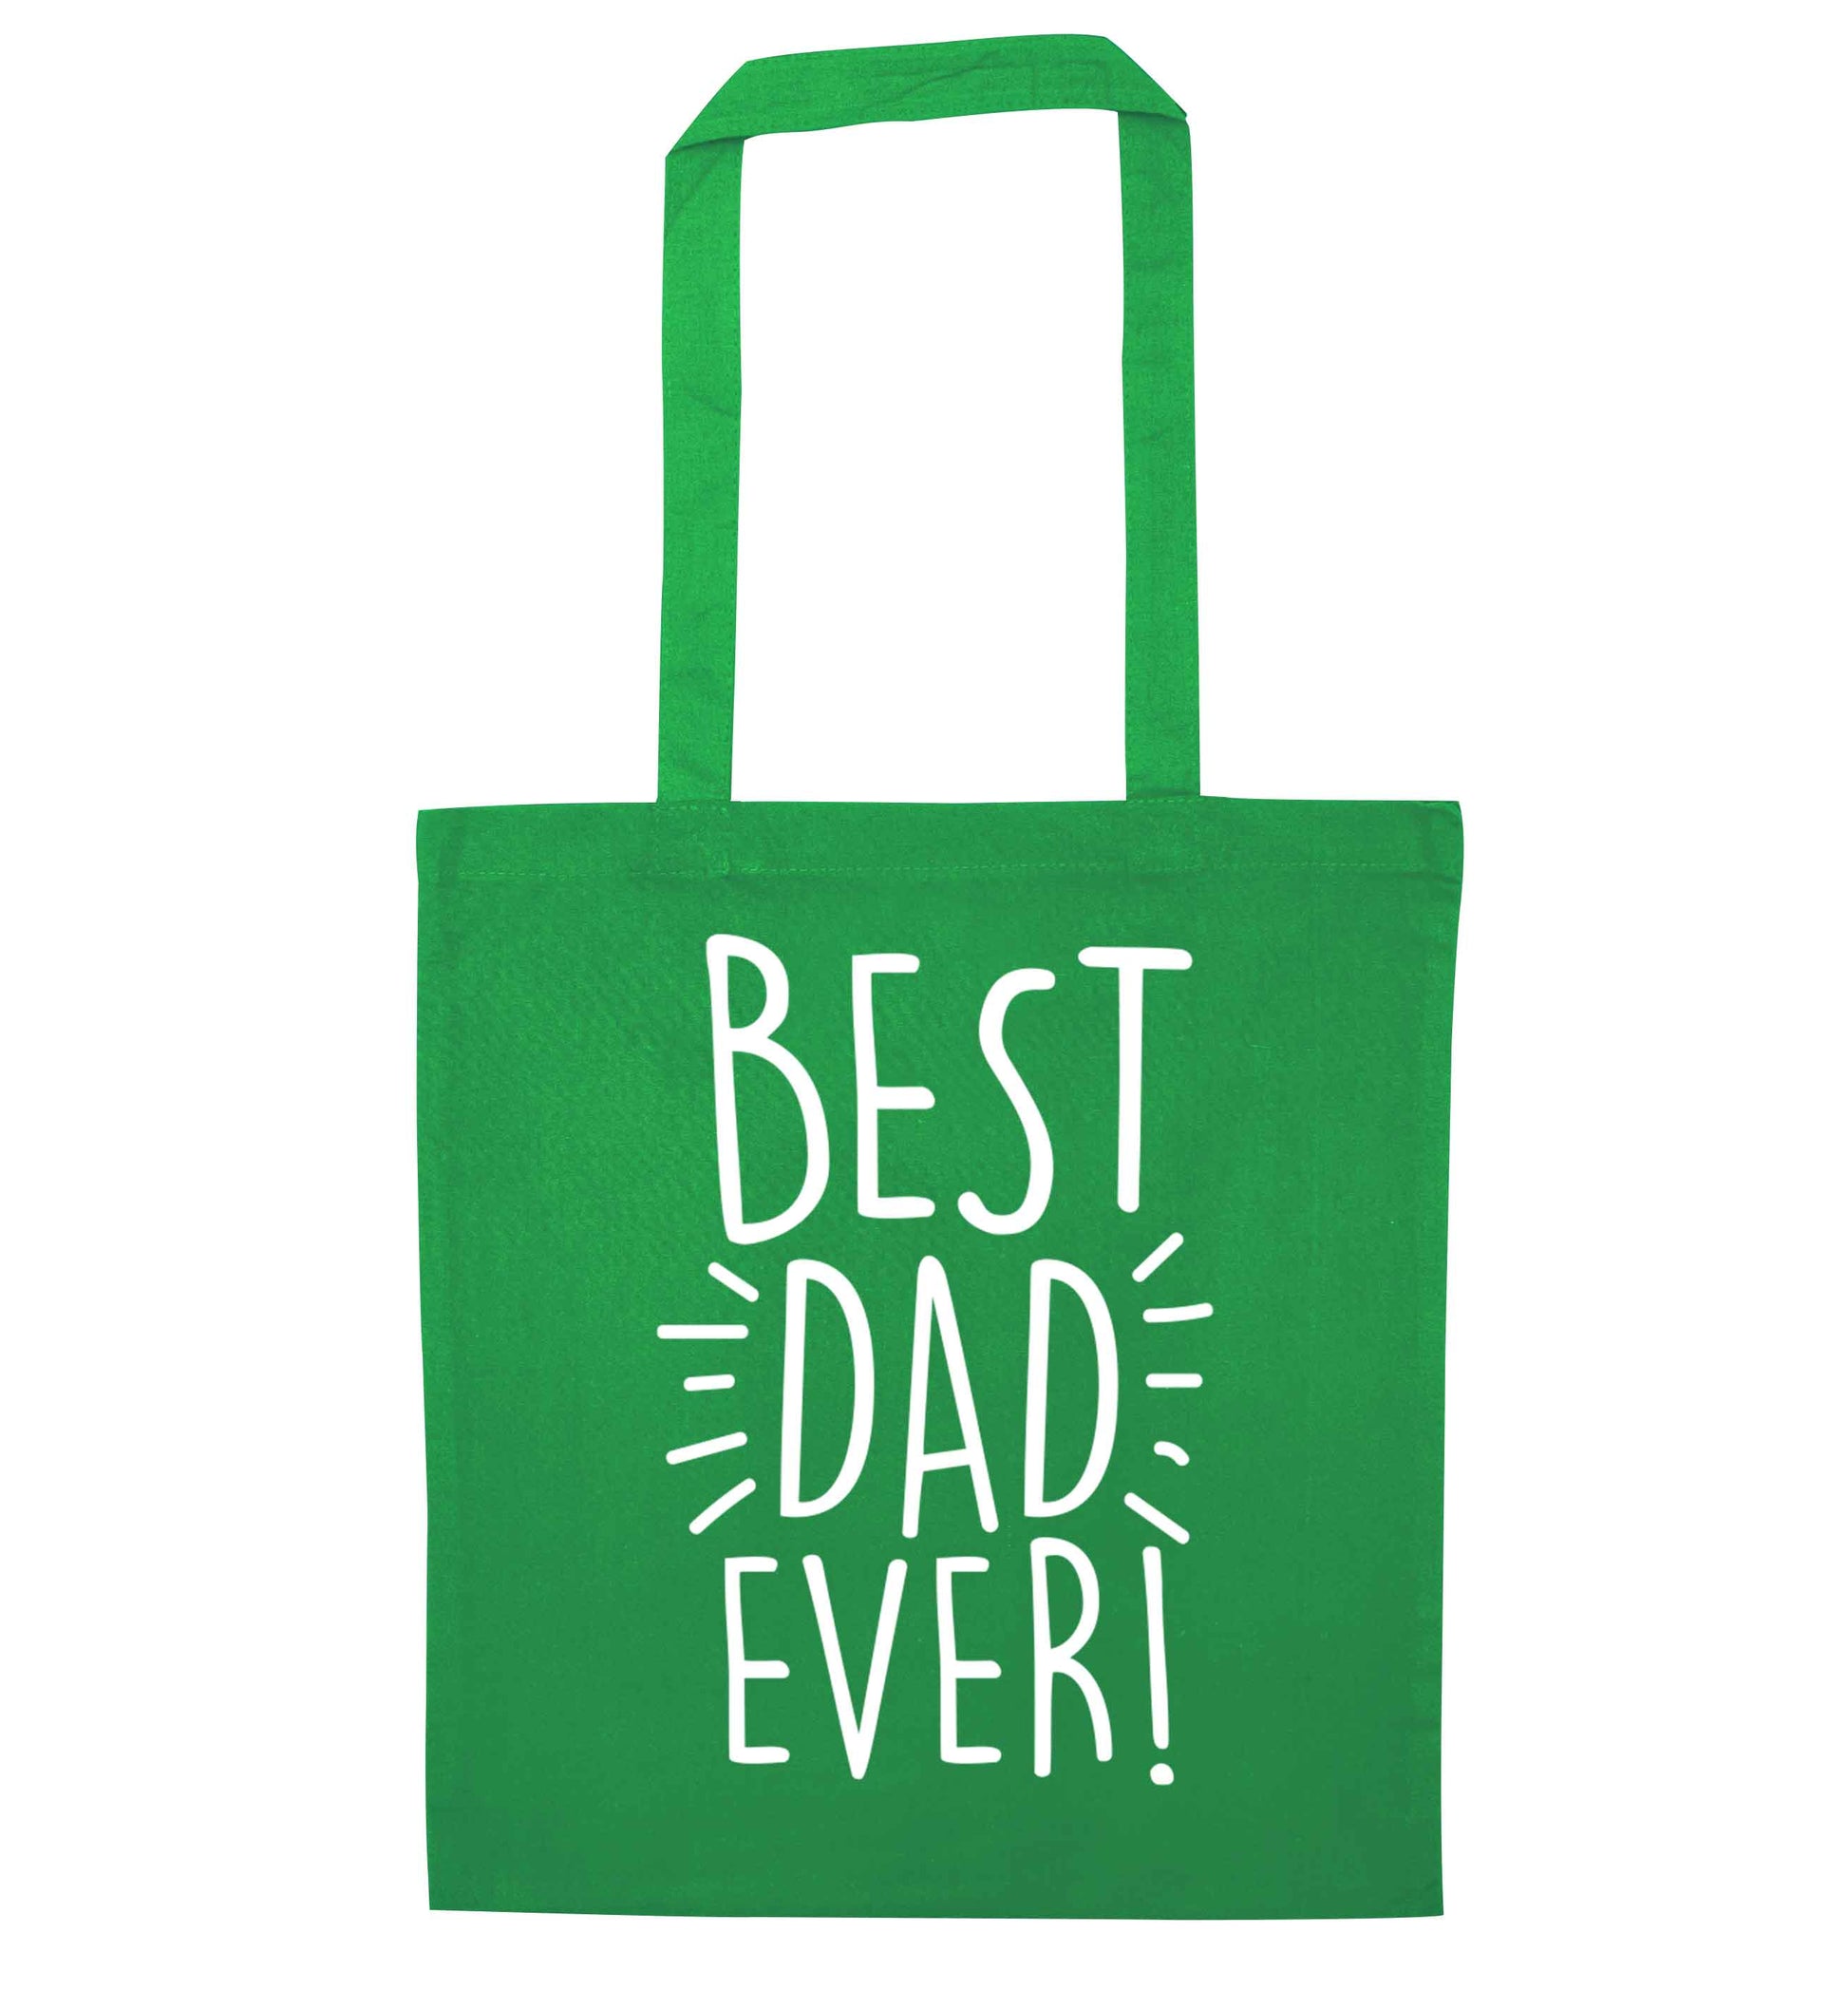 Best dad ever! green tote bag